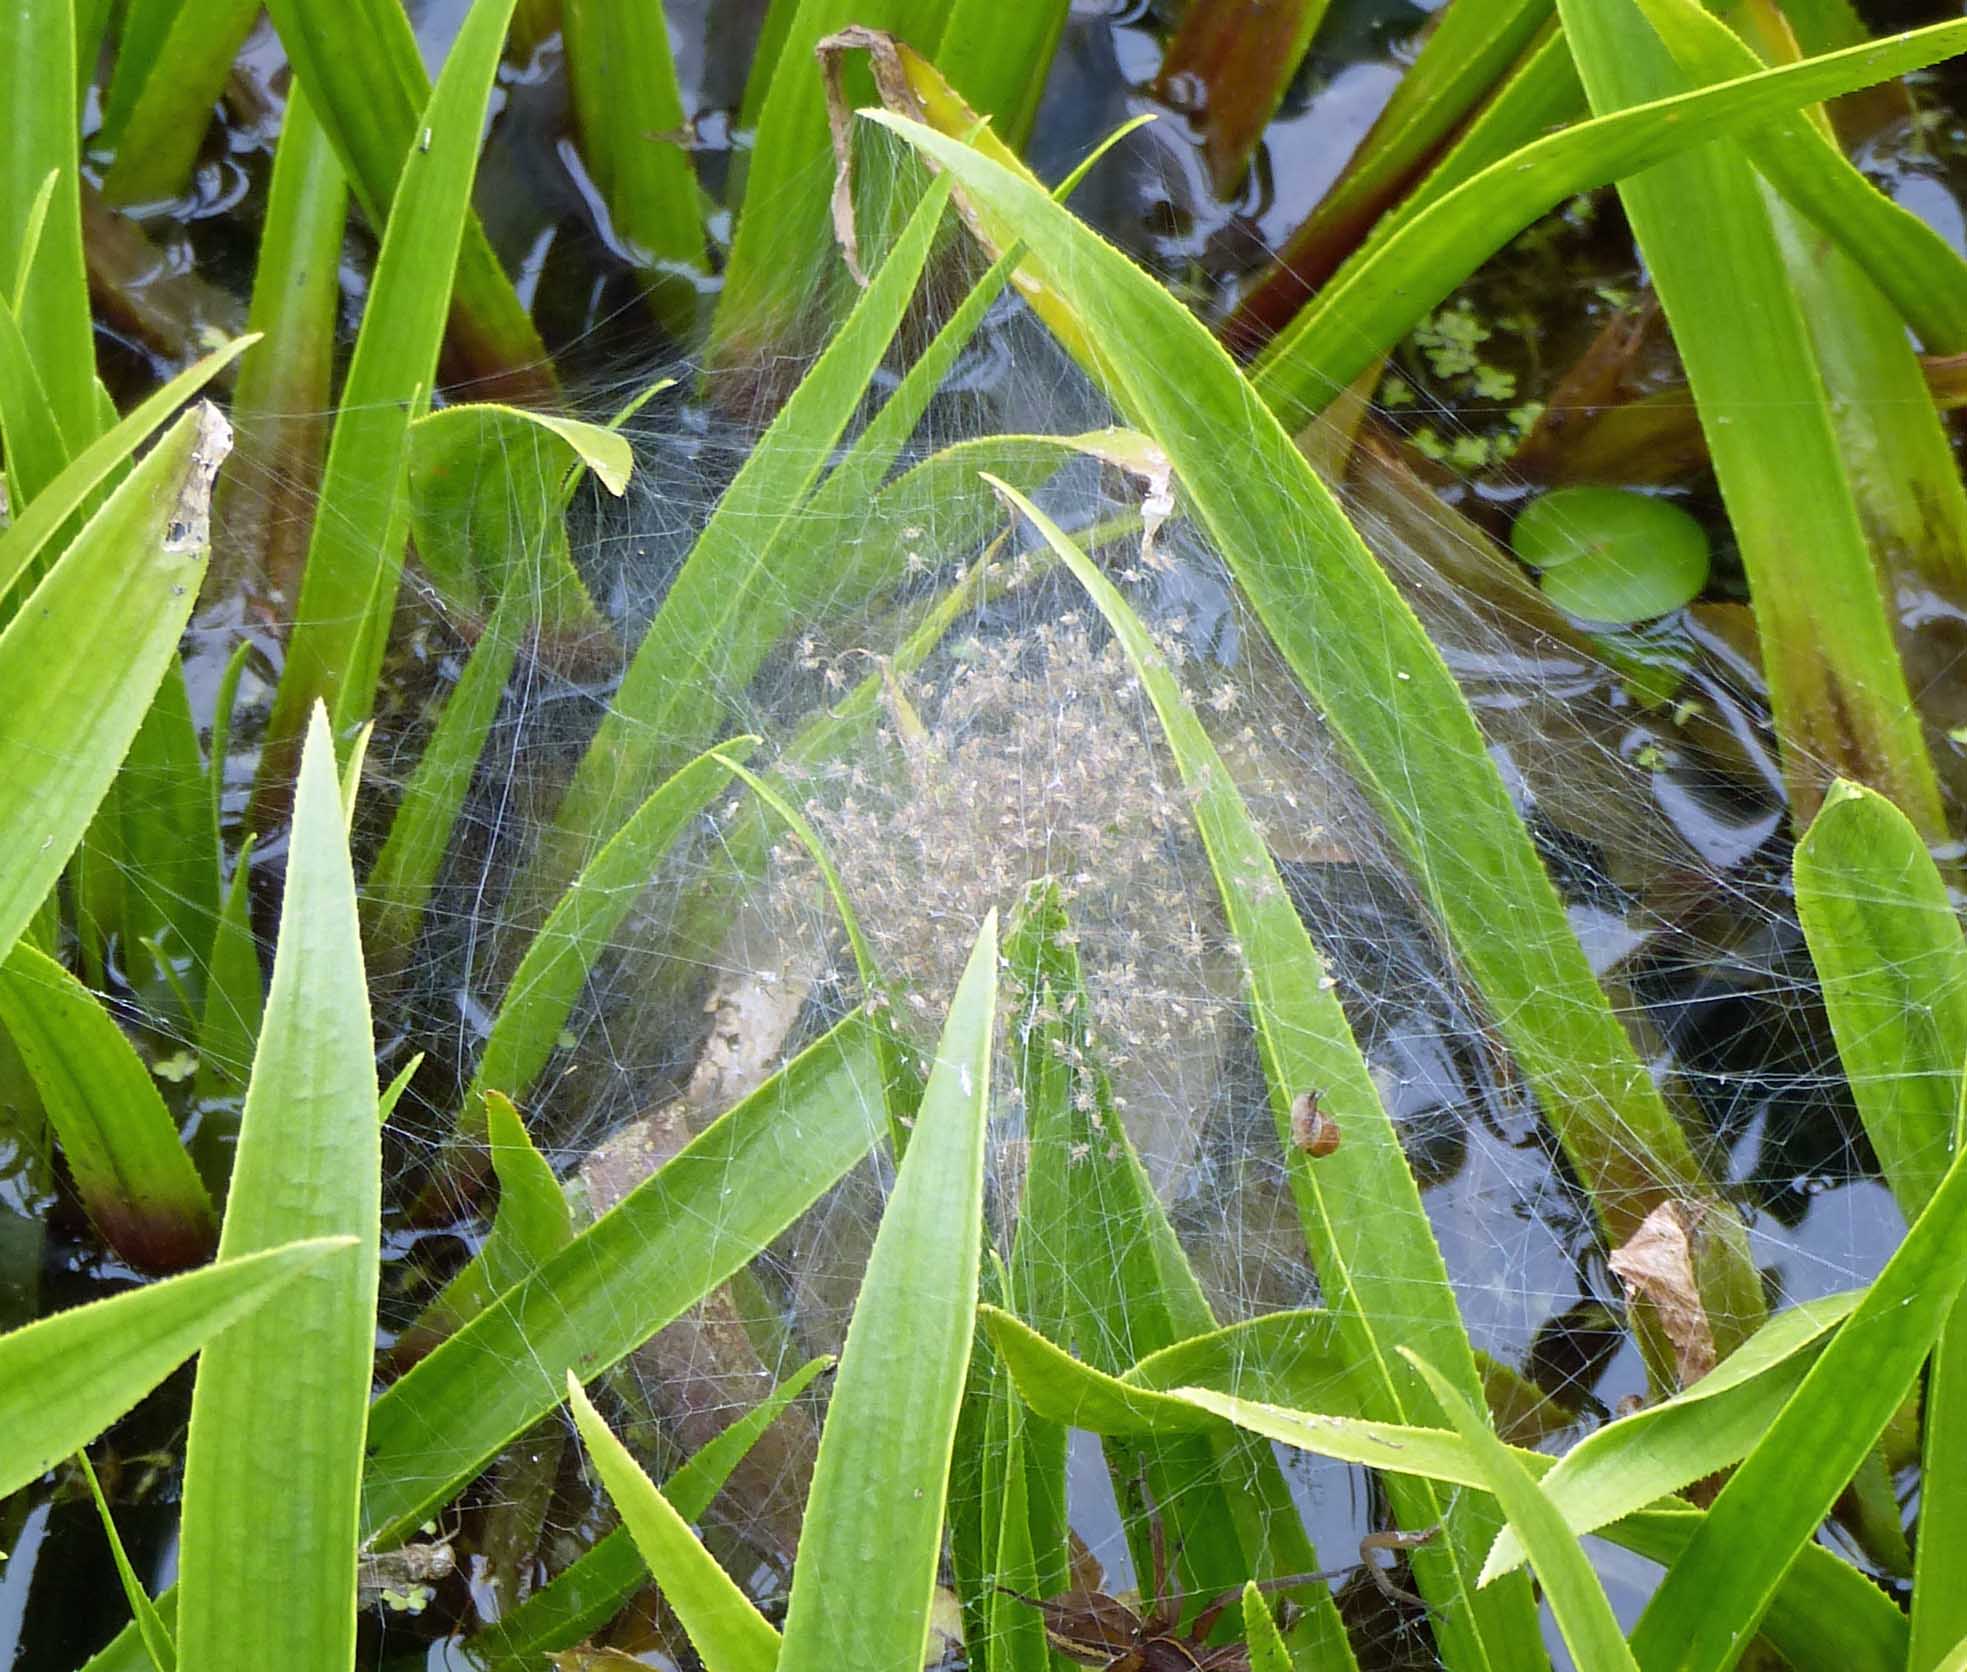 Spiderlings disperse through the web on disturbance and at night